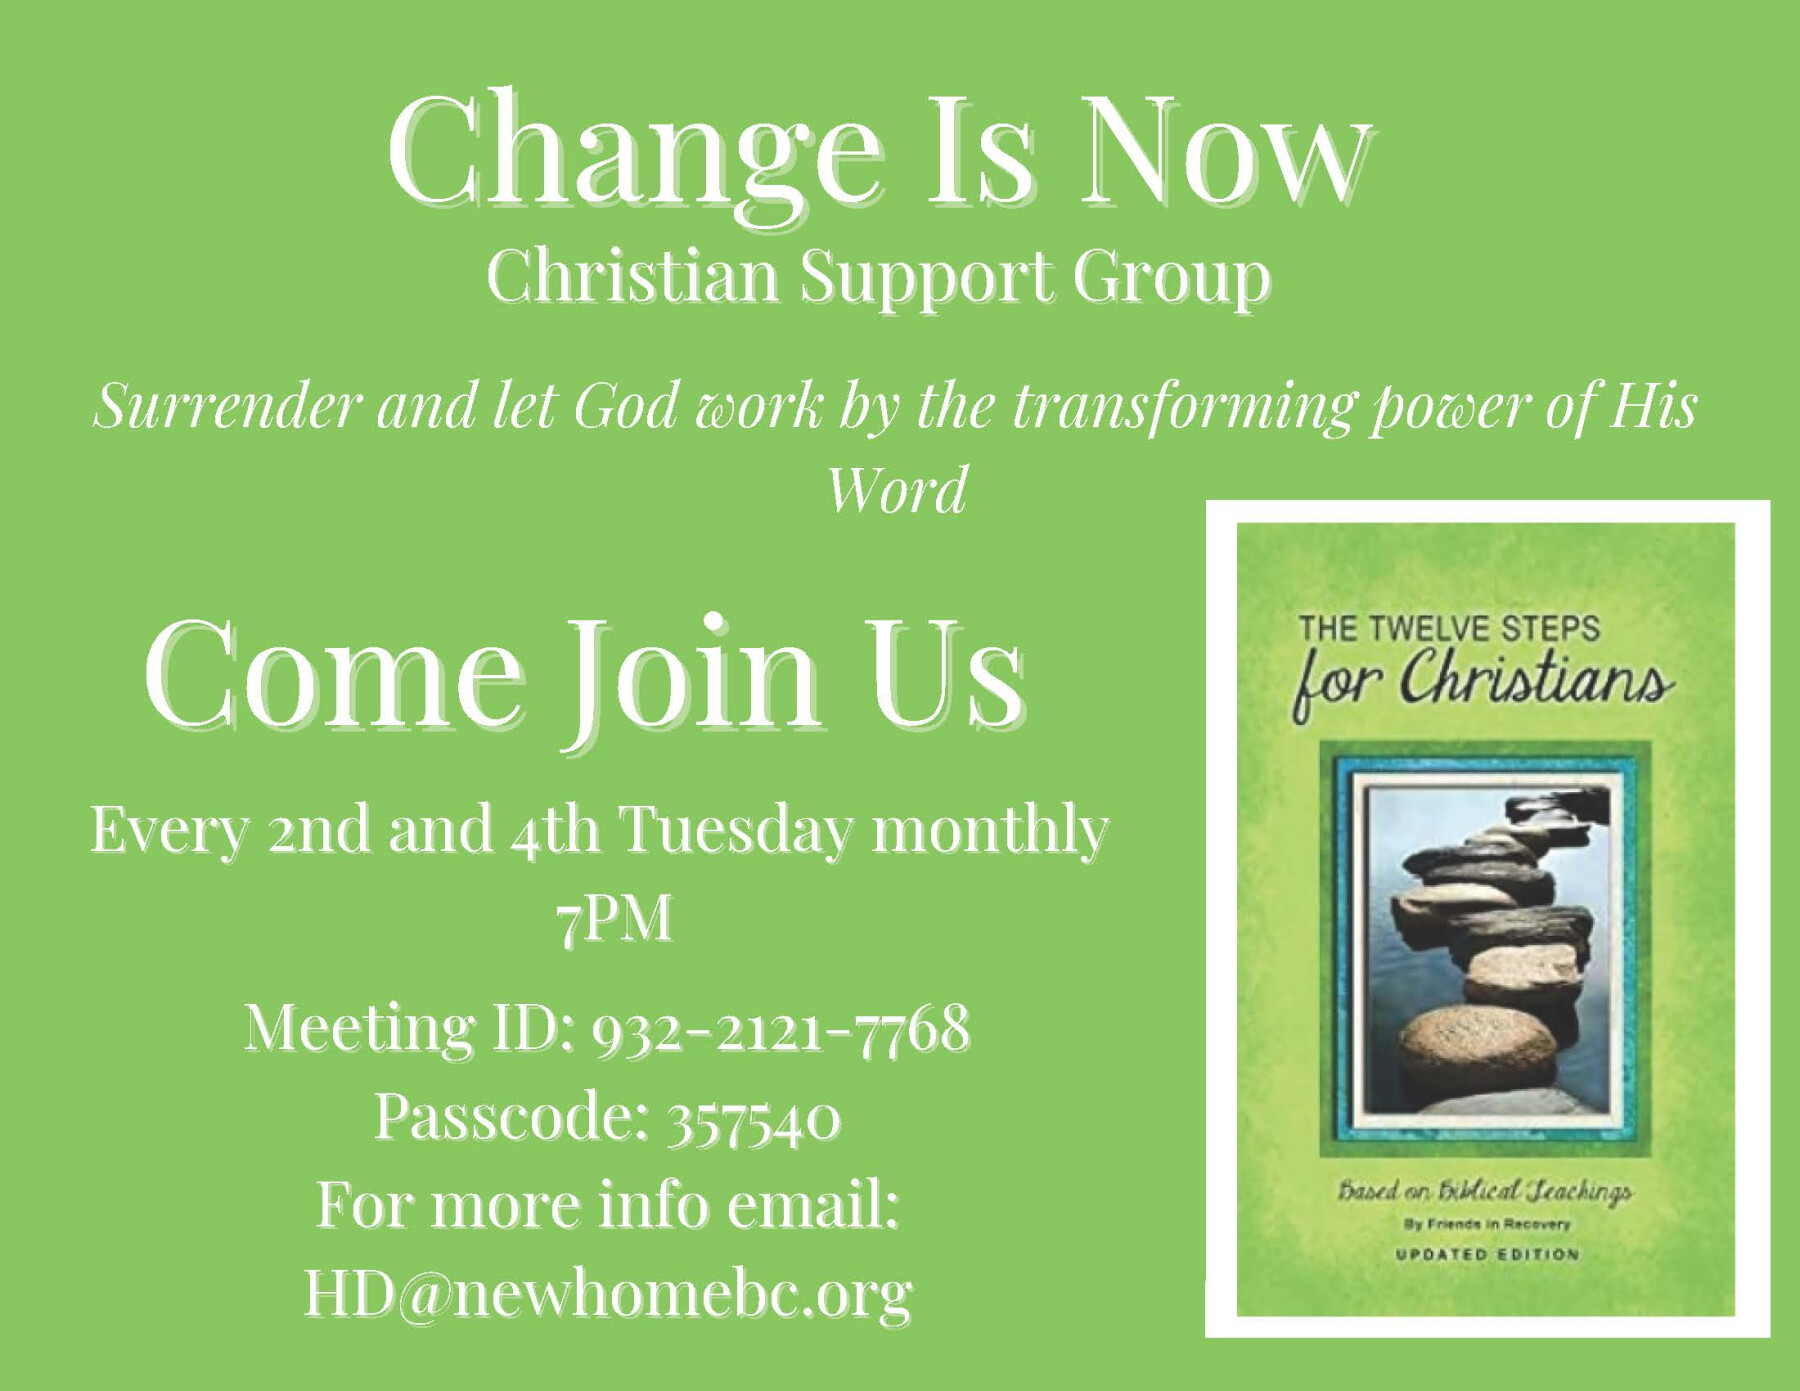 "Change Is Now" Christian Support Group Zoom